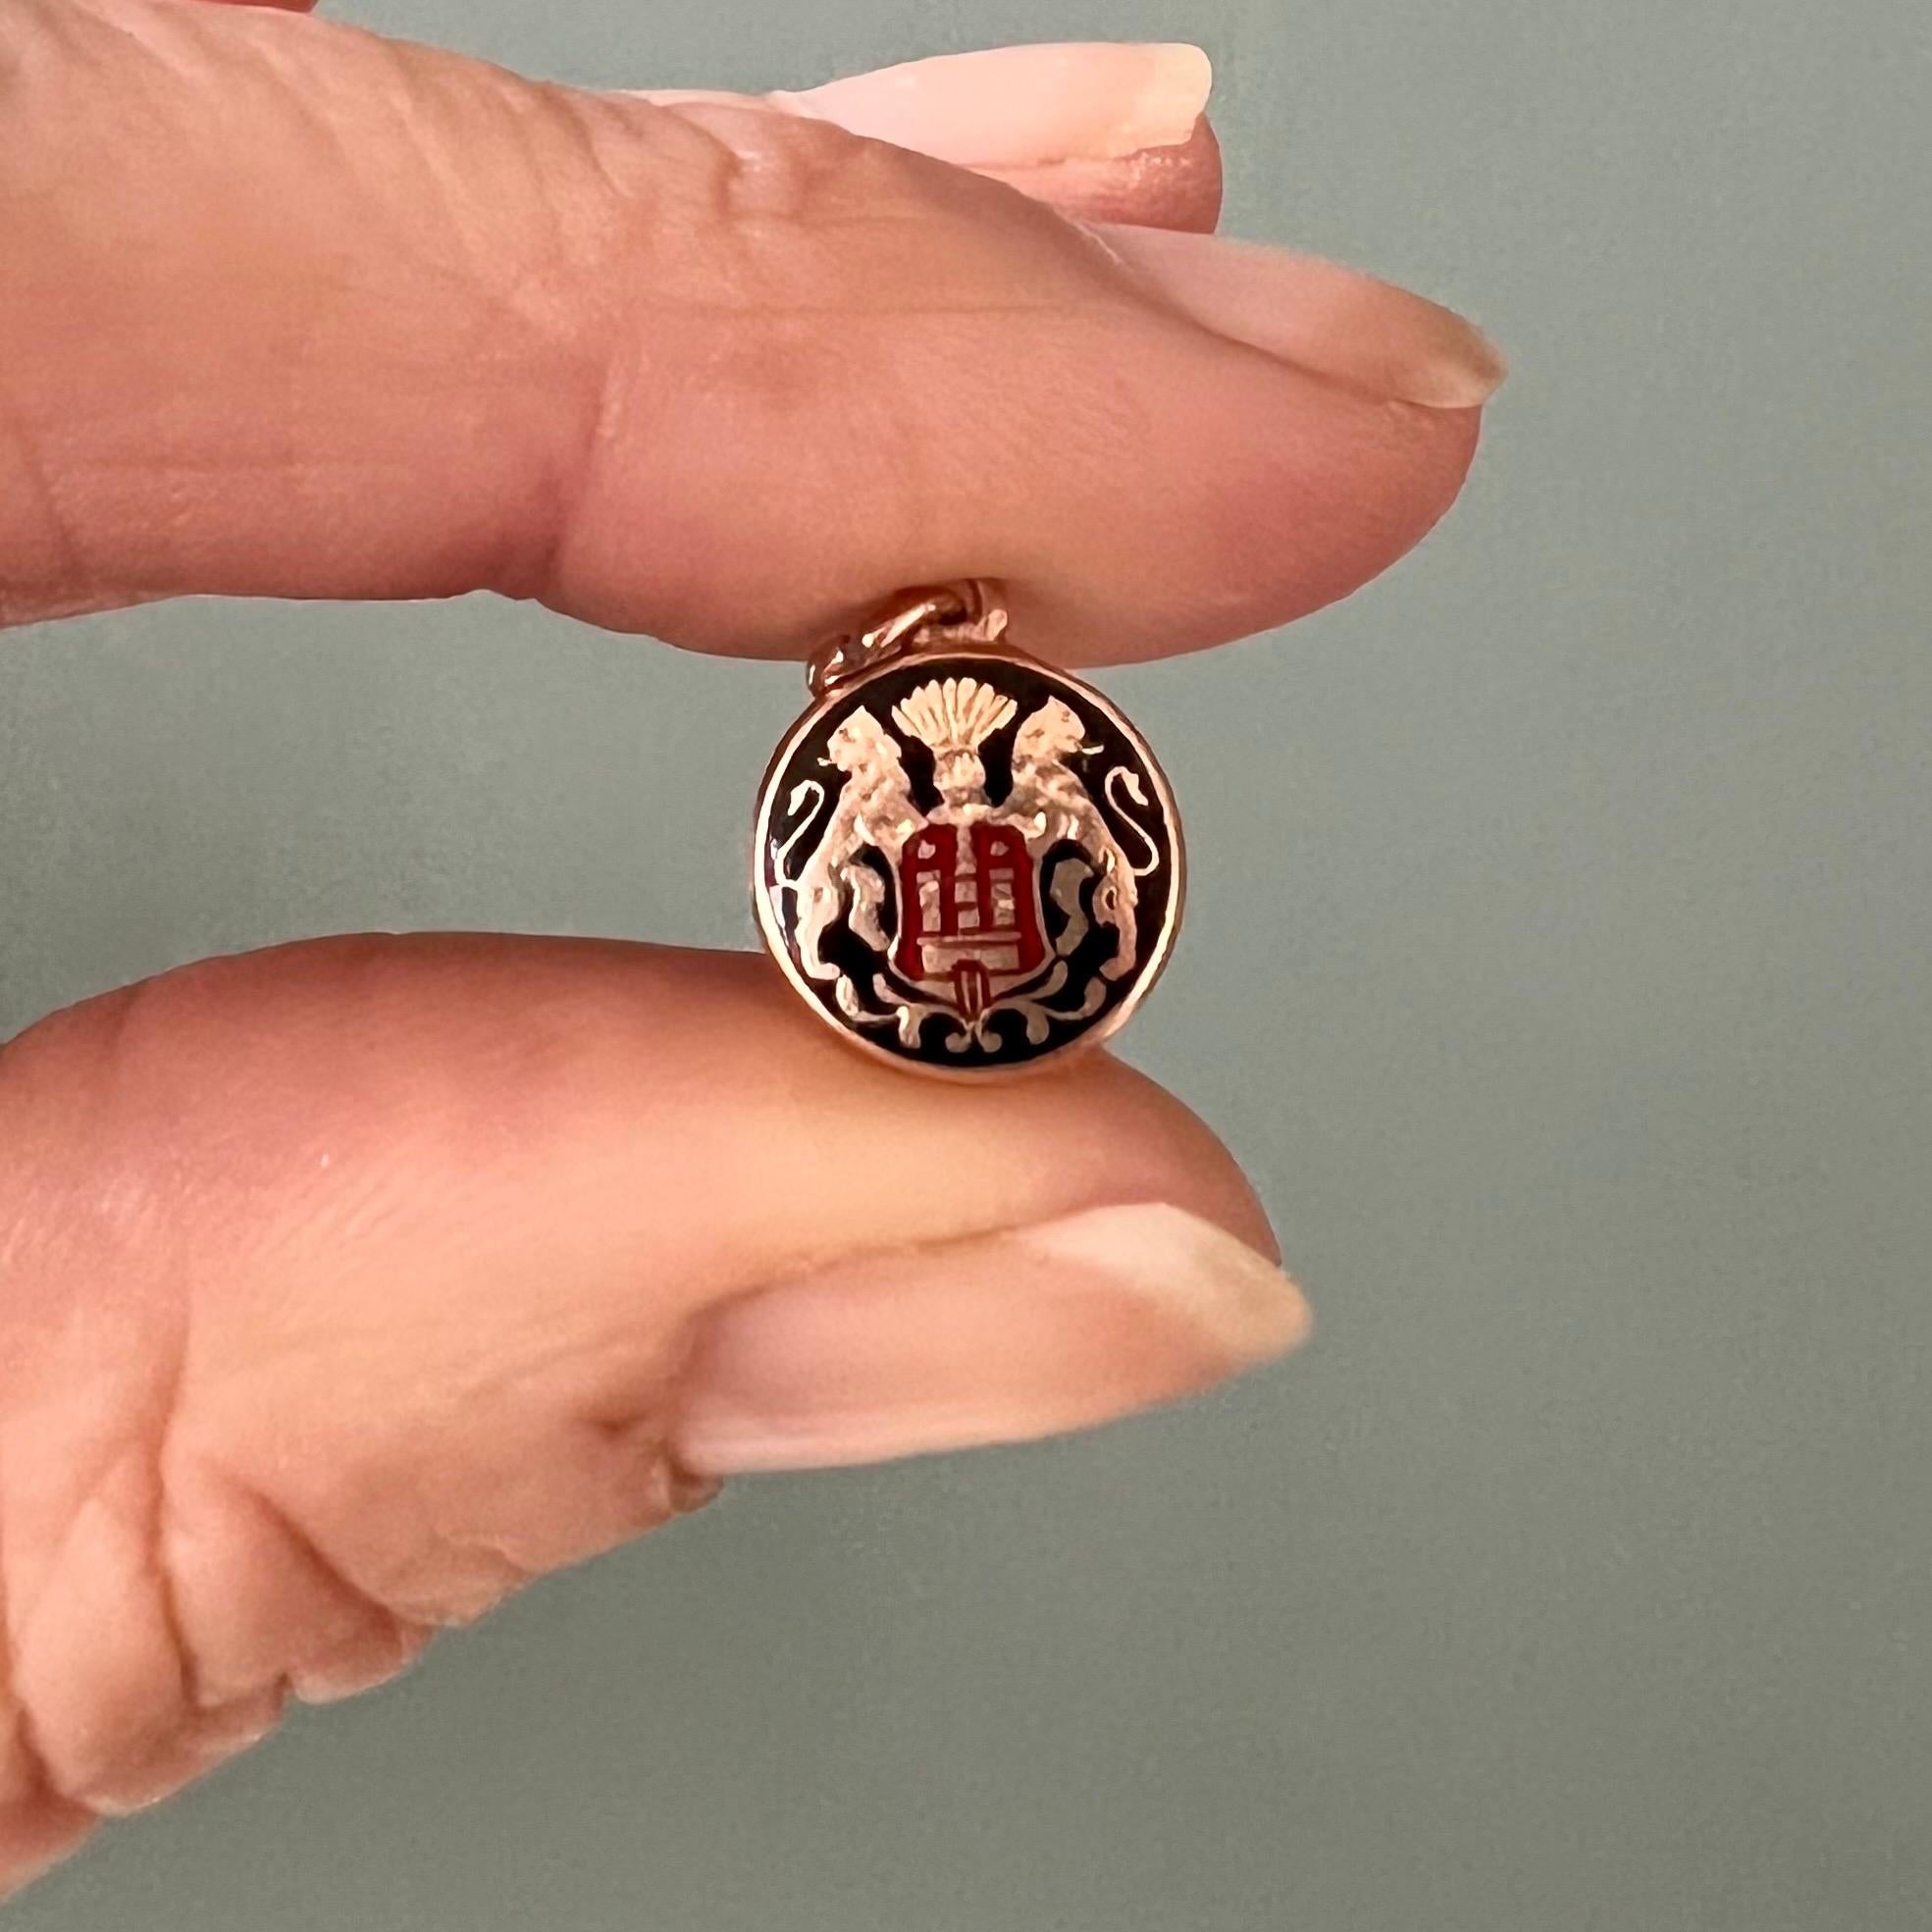 This is a 14 karat yellow gold vintage small round coat of arms charm pendant. The shield has a design of two lions holding a red enamel shield with a black enamel background. The charm is beautifully crafted in gold and enamel.

Charms are great to